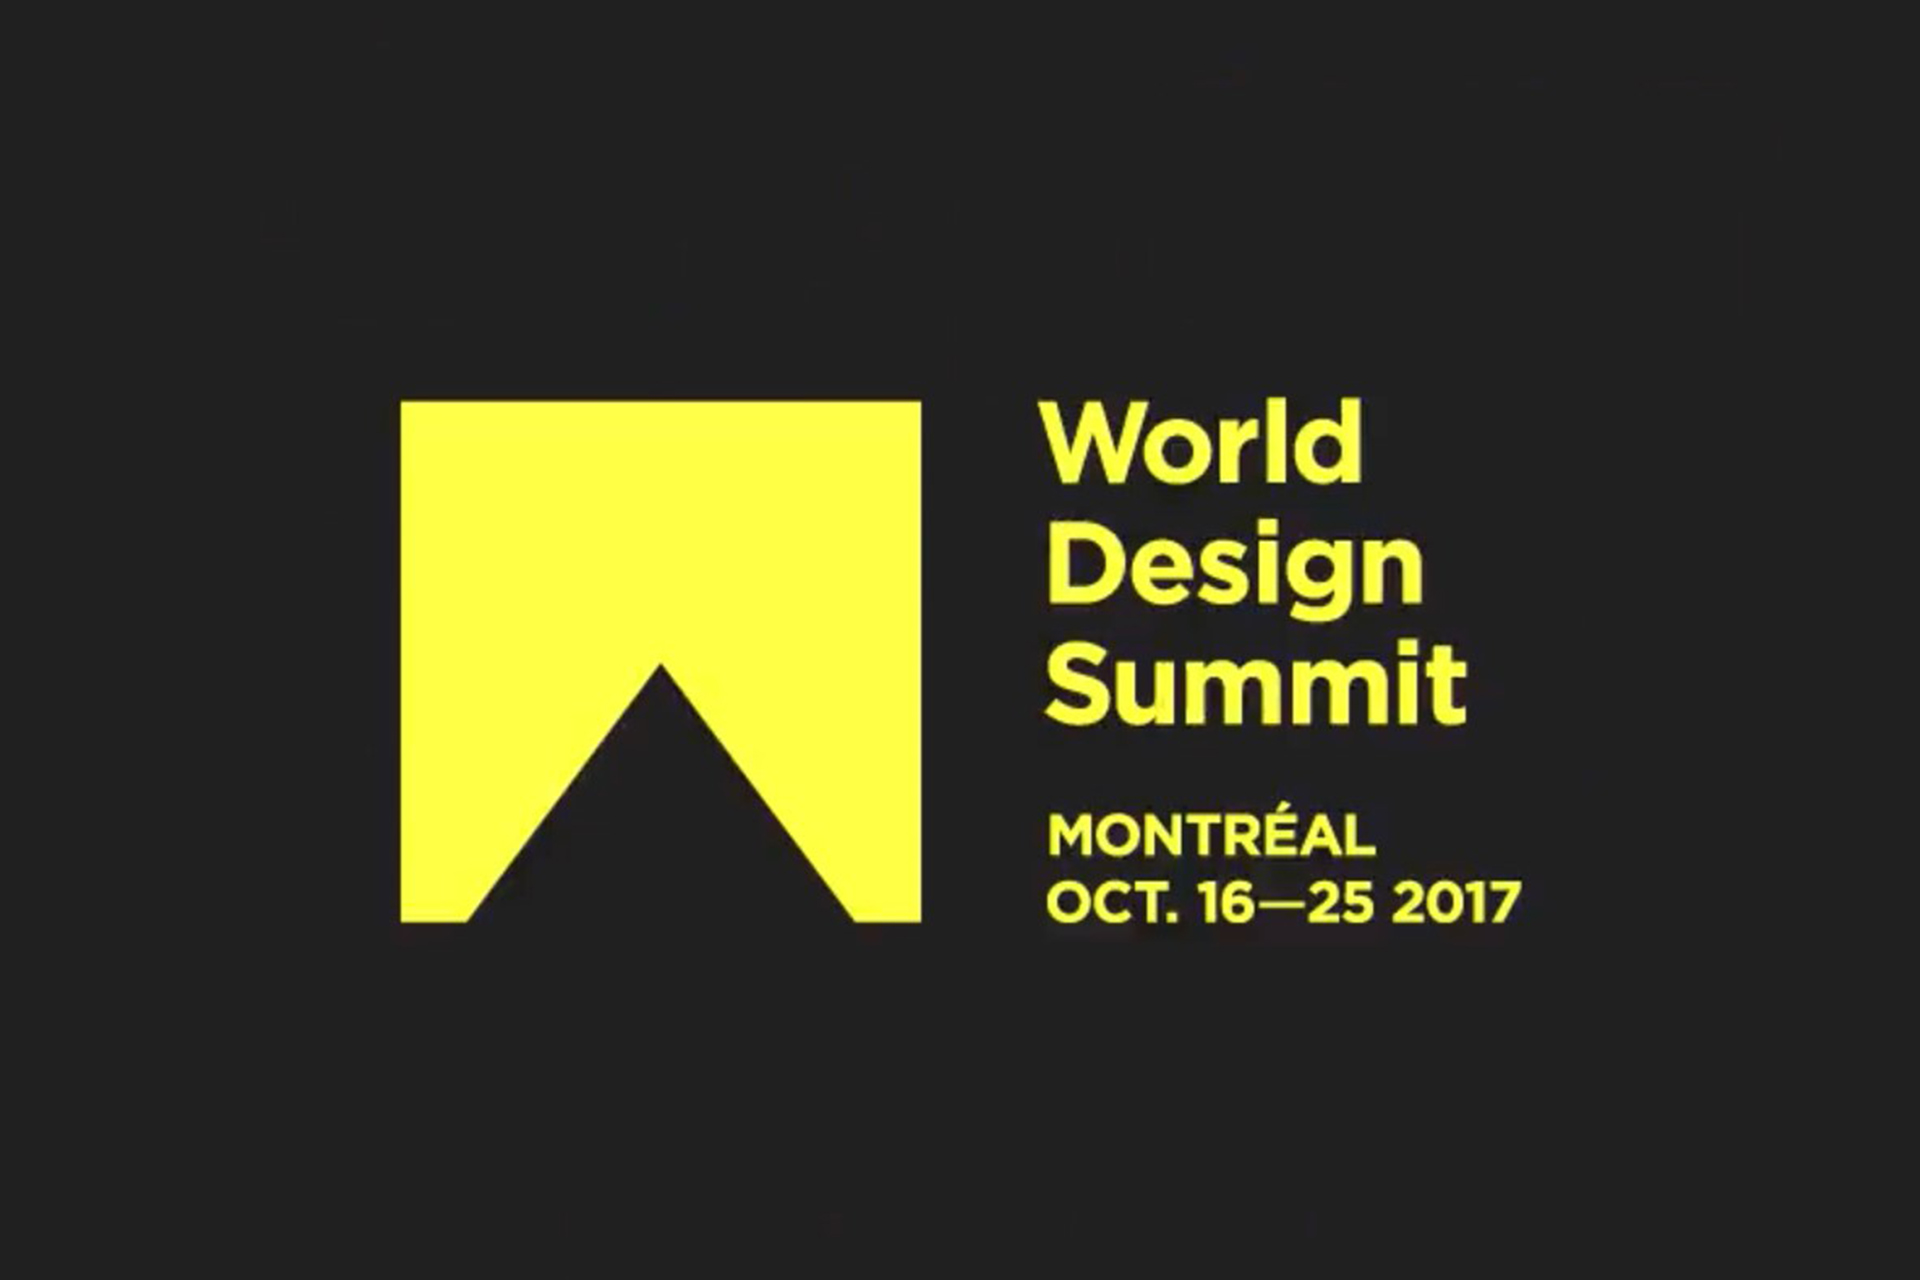 We'll be at the World Design Summit — see you there? GSM Project